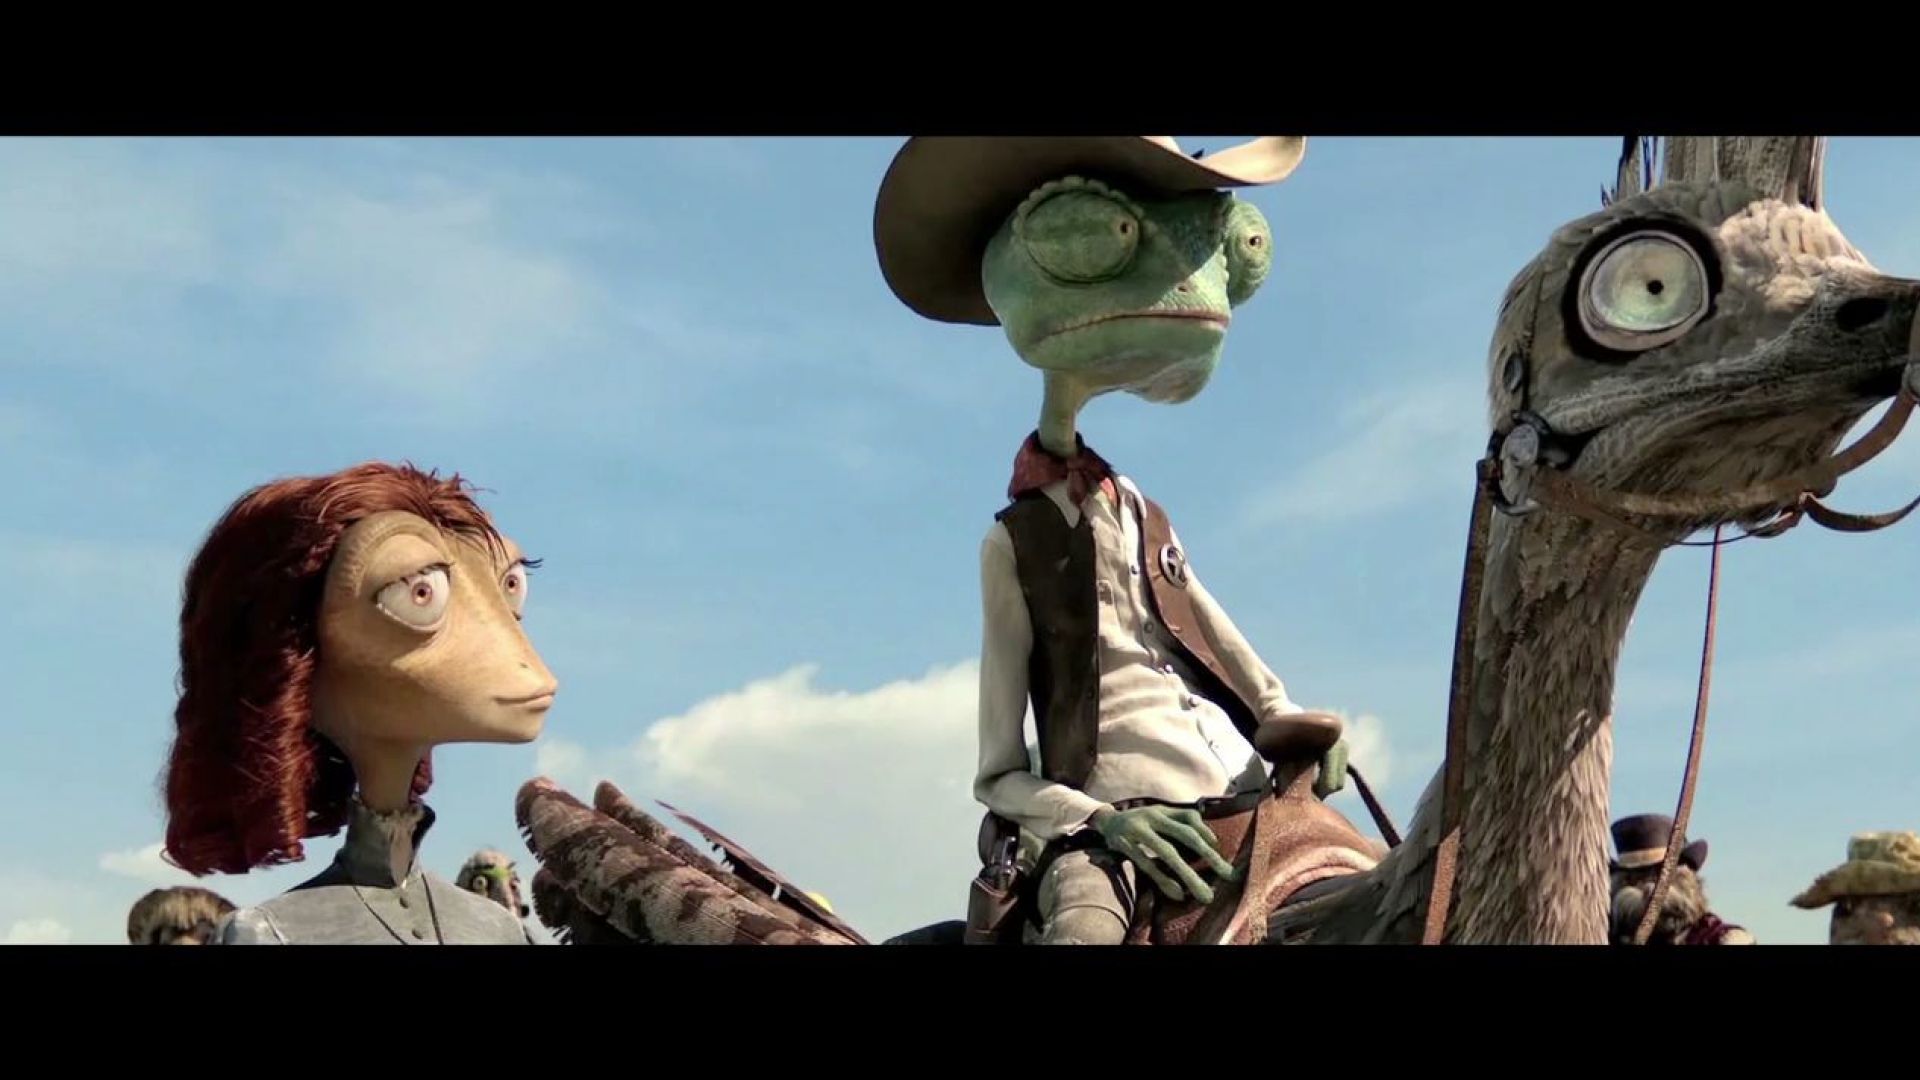 Rango has an image to protect now